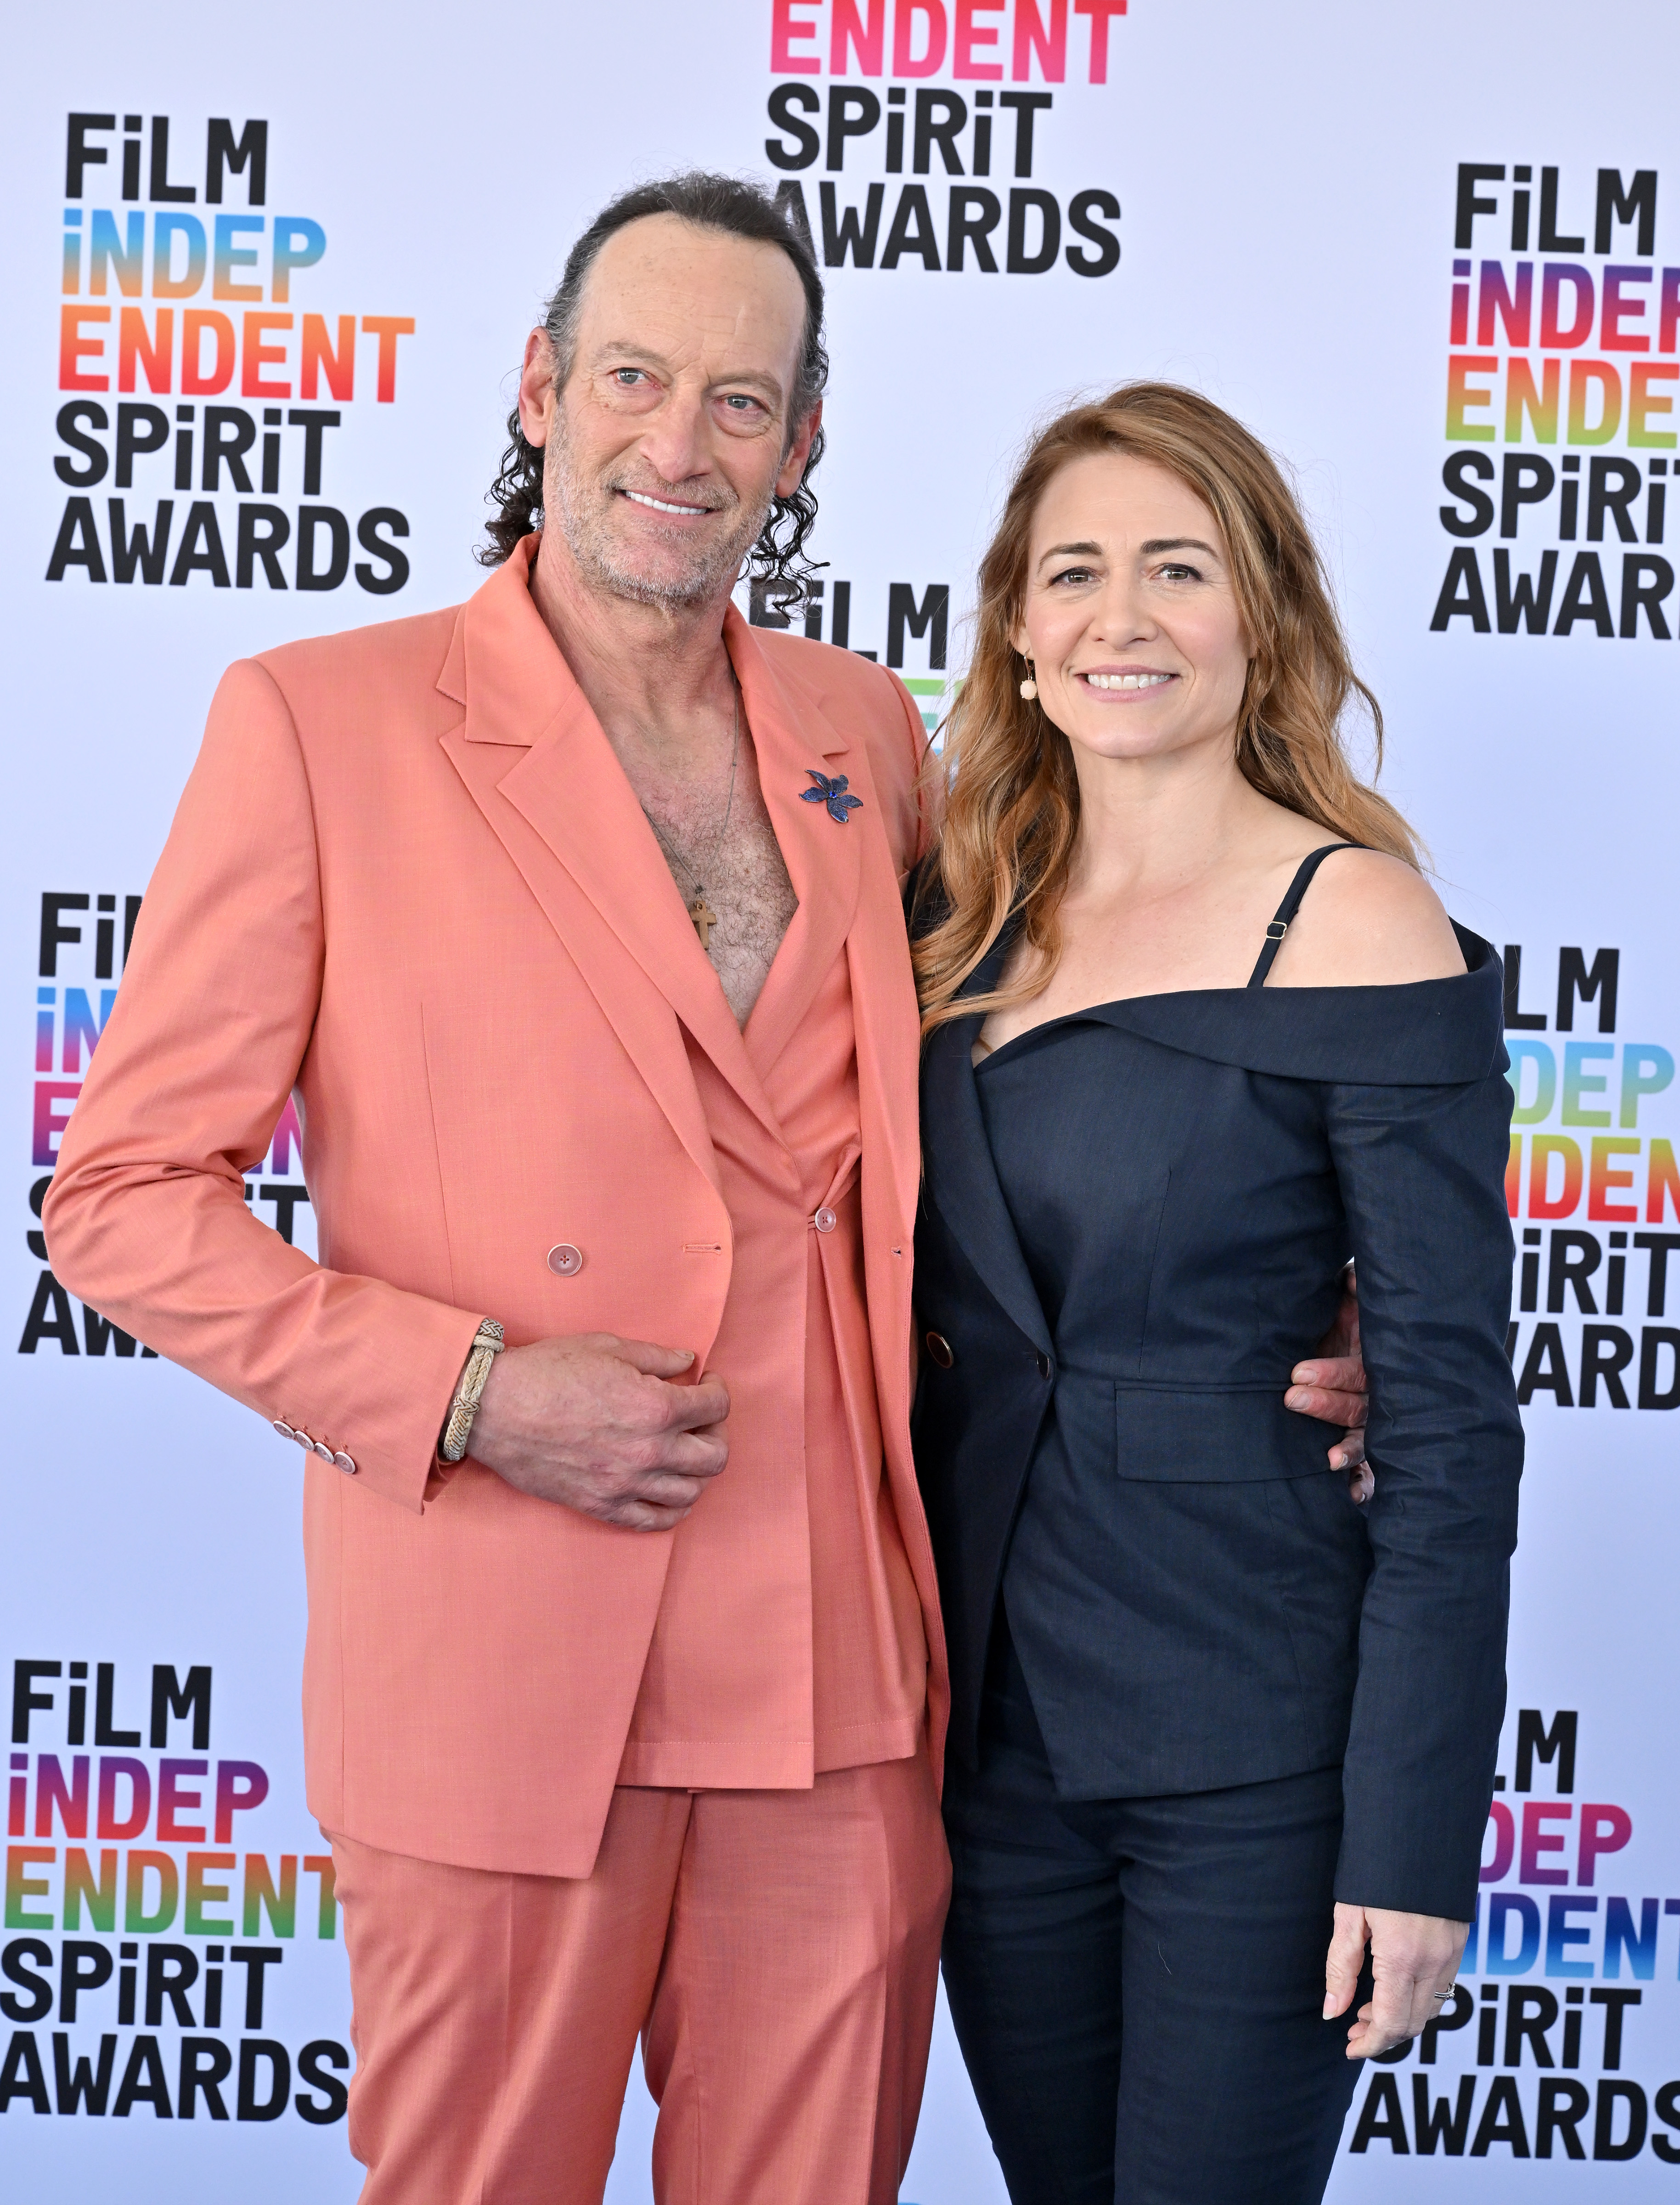 Troy Kotsur and Deanne Bray at the 2023 Film Independent Spirit Awards on March 4, 2023, in Santa Monica, California. | Source: Getty Images